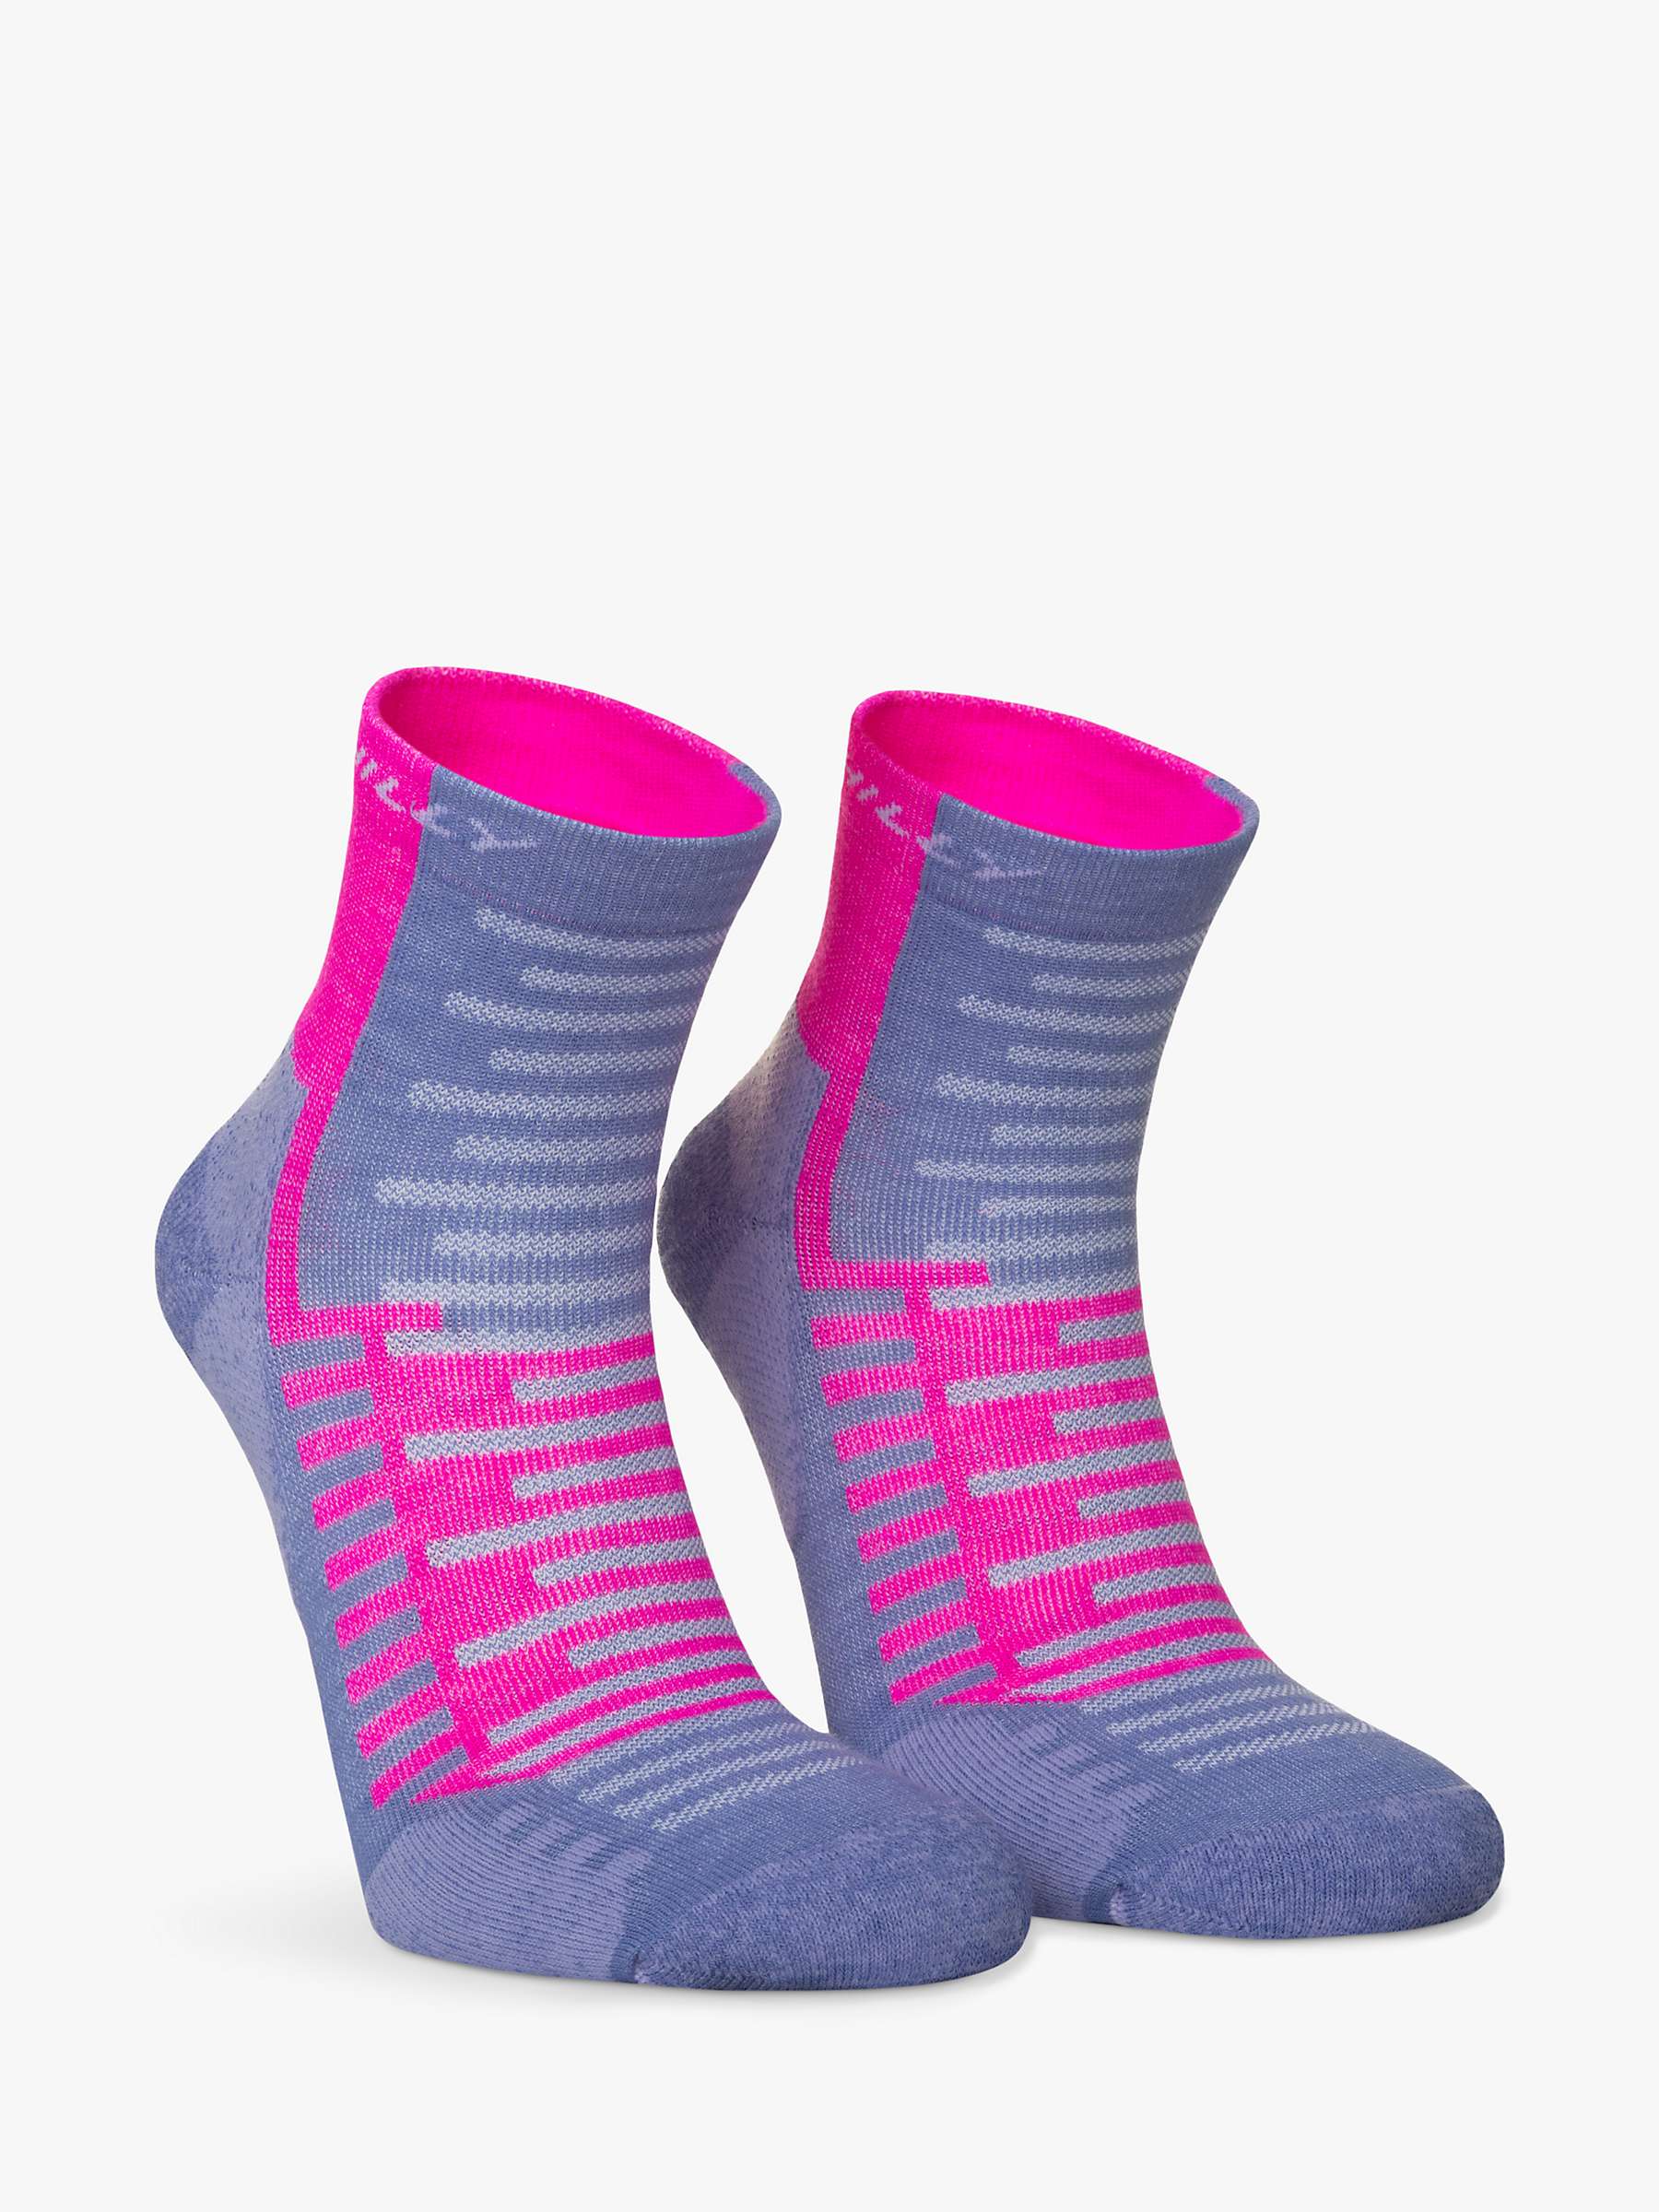 Buy Hilly Active Ankle Running Socks Online at johnlewis.com